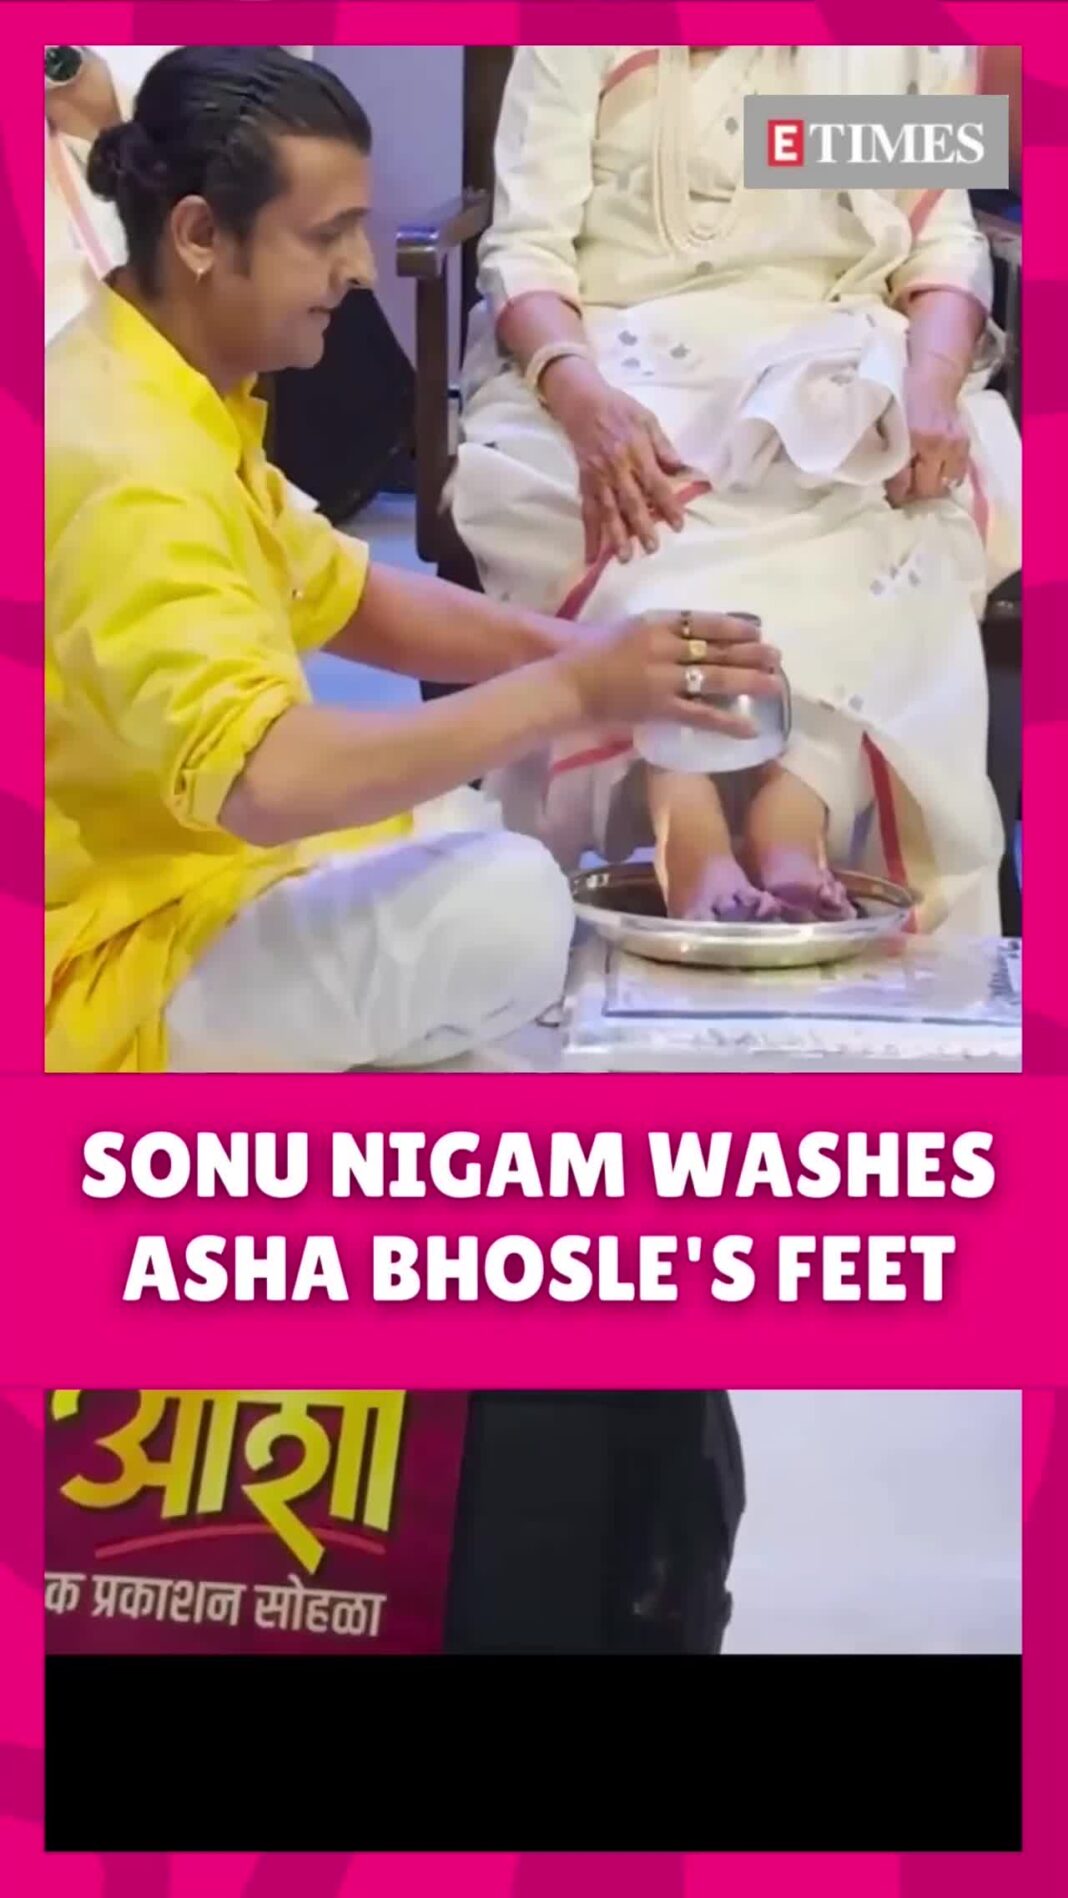 sonu-nigam’s-touching-gesture:-washes-asha-bhosle’s-feet-with-rose-water